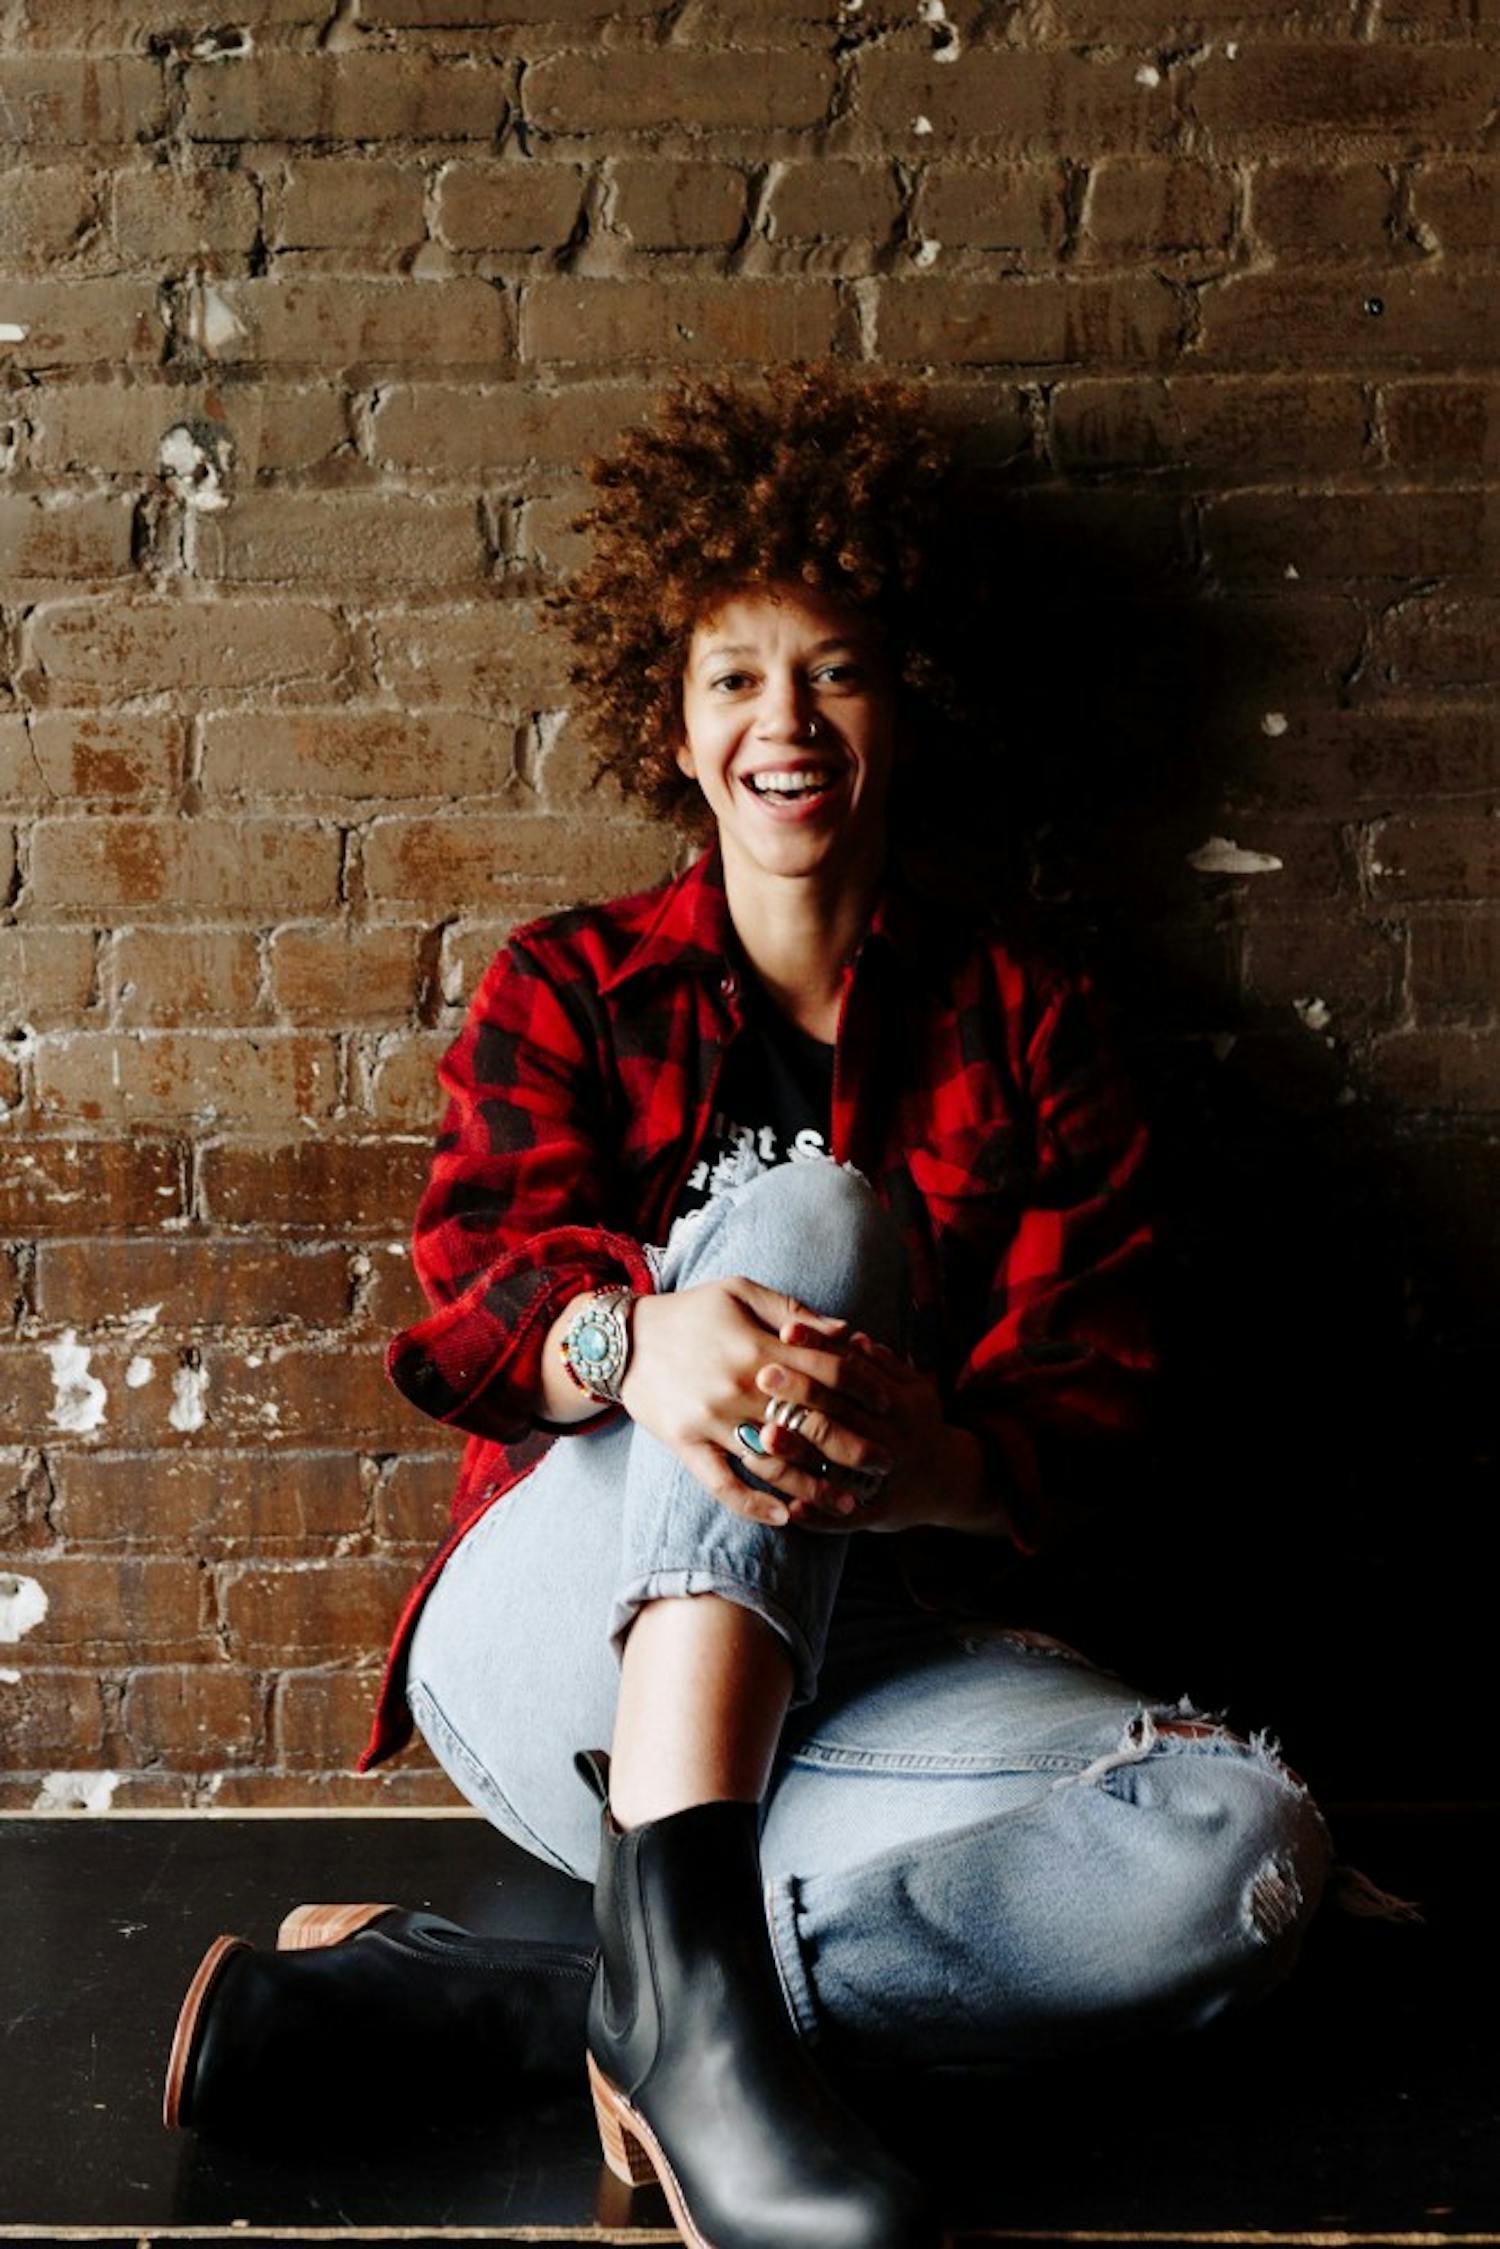 Chastity Brown, a singer-songwriter currently based in Minneapolis, is performing at Buffalo’s Babeville on Nov. 14. Brown spoke with The Spectrum on her upcoming tour and her latest album “Silhouette of Sirens,” released this past May.